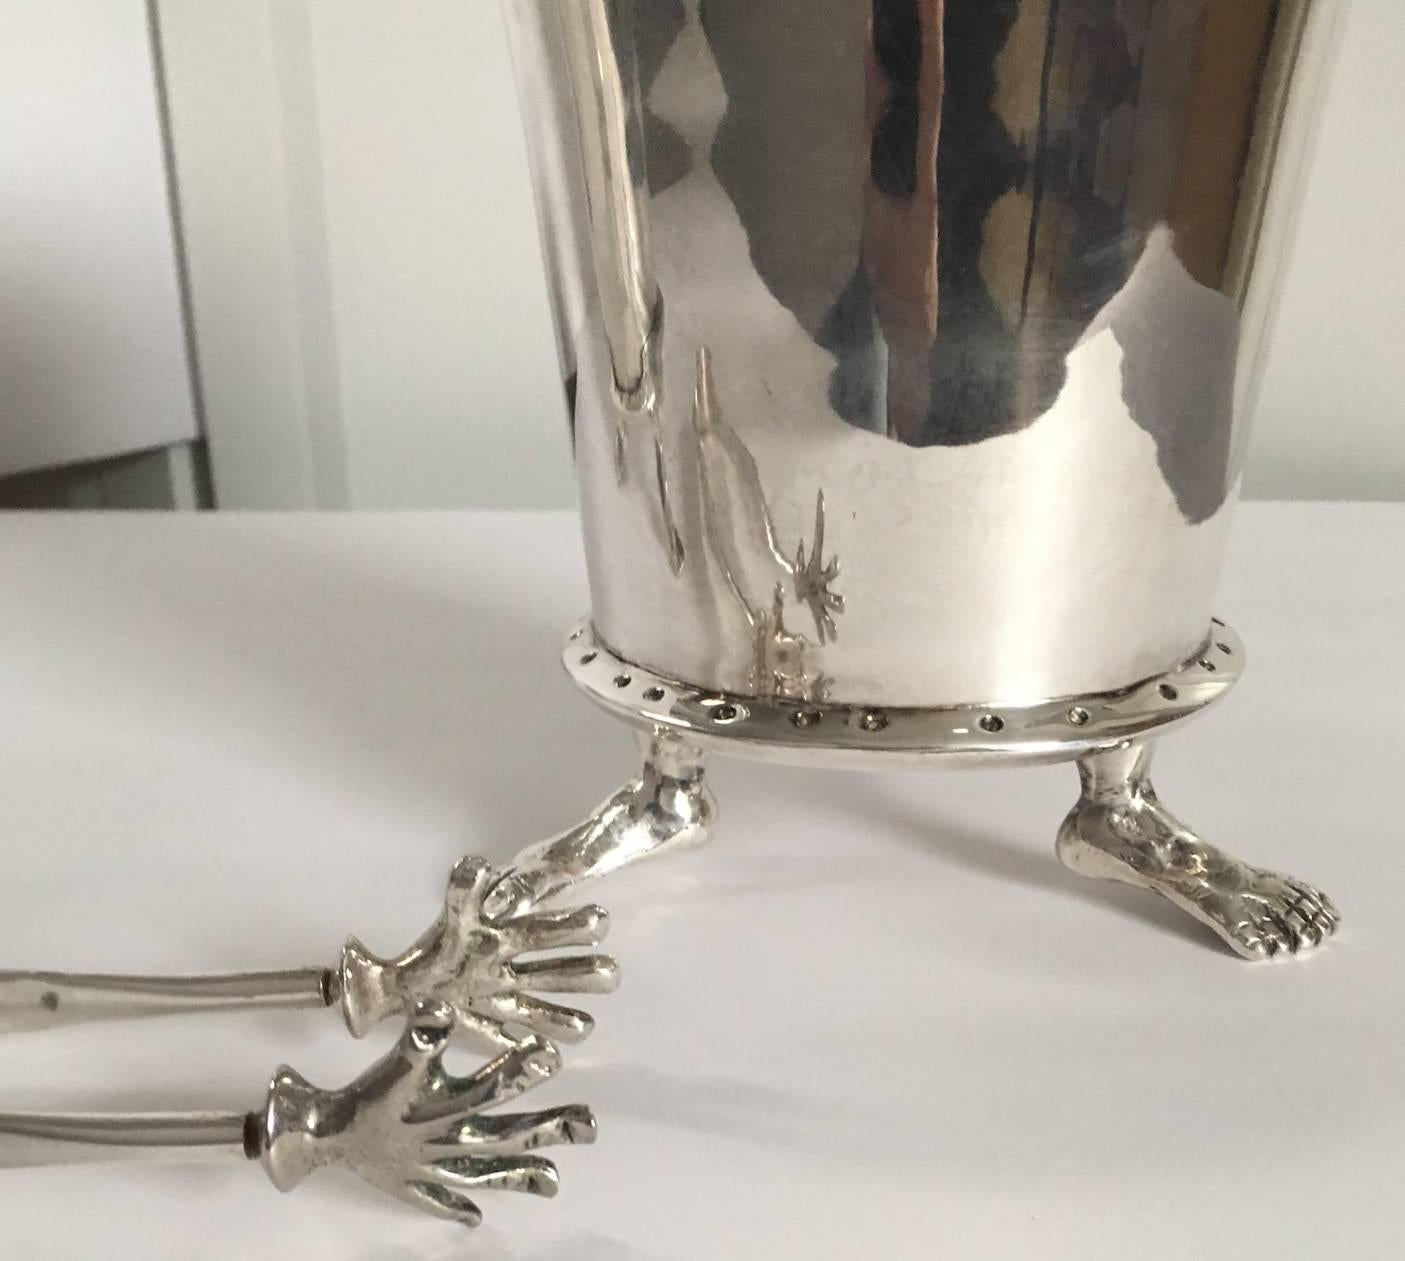 Original 1990s production of the hands and feet collection by renowned metal artisan Michael Aram. Offered are two silver plated footed ice buckets with one pair of tongs. A later and lesser detailed version of Aram's hands and feet collection was